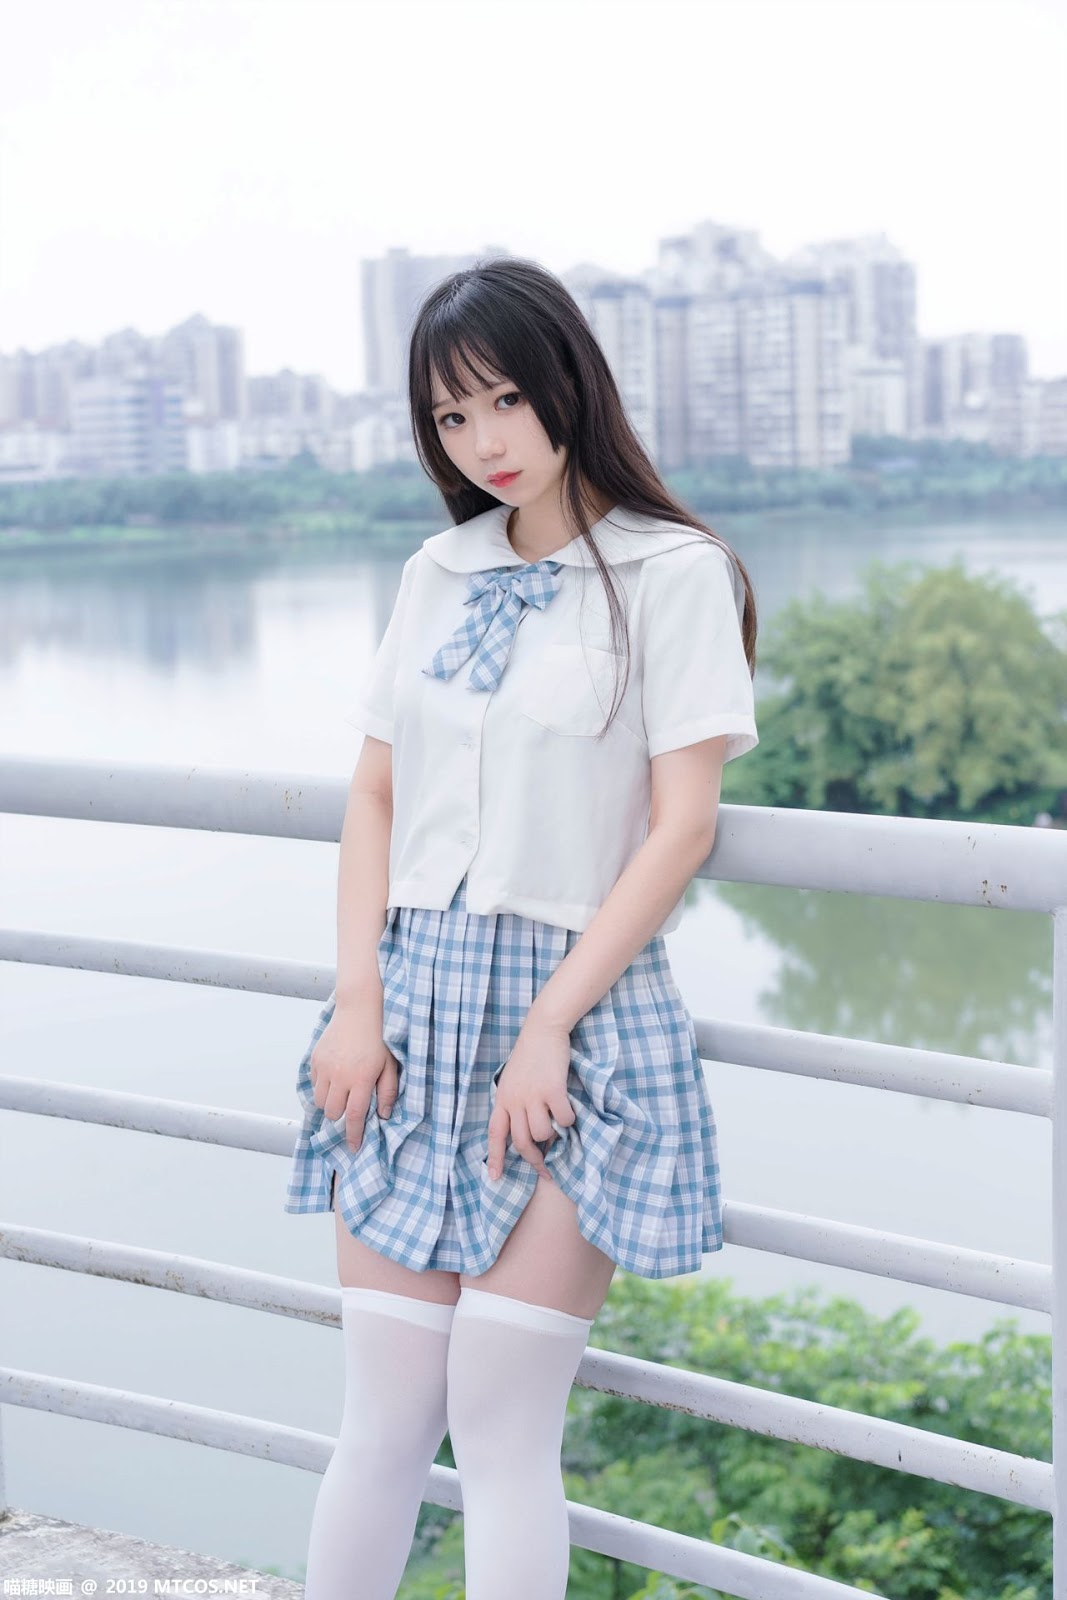 Image [MTCos] 喵糖映画 Vol.015 – Chinese Cute Model - White Shirt and Plaid Skirt - TruePic.net- Picture-11